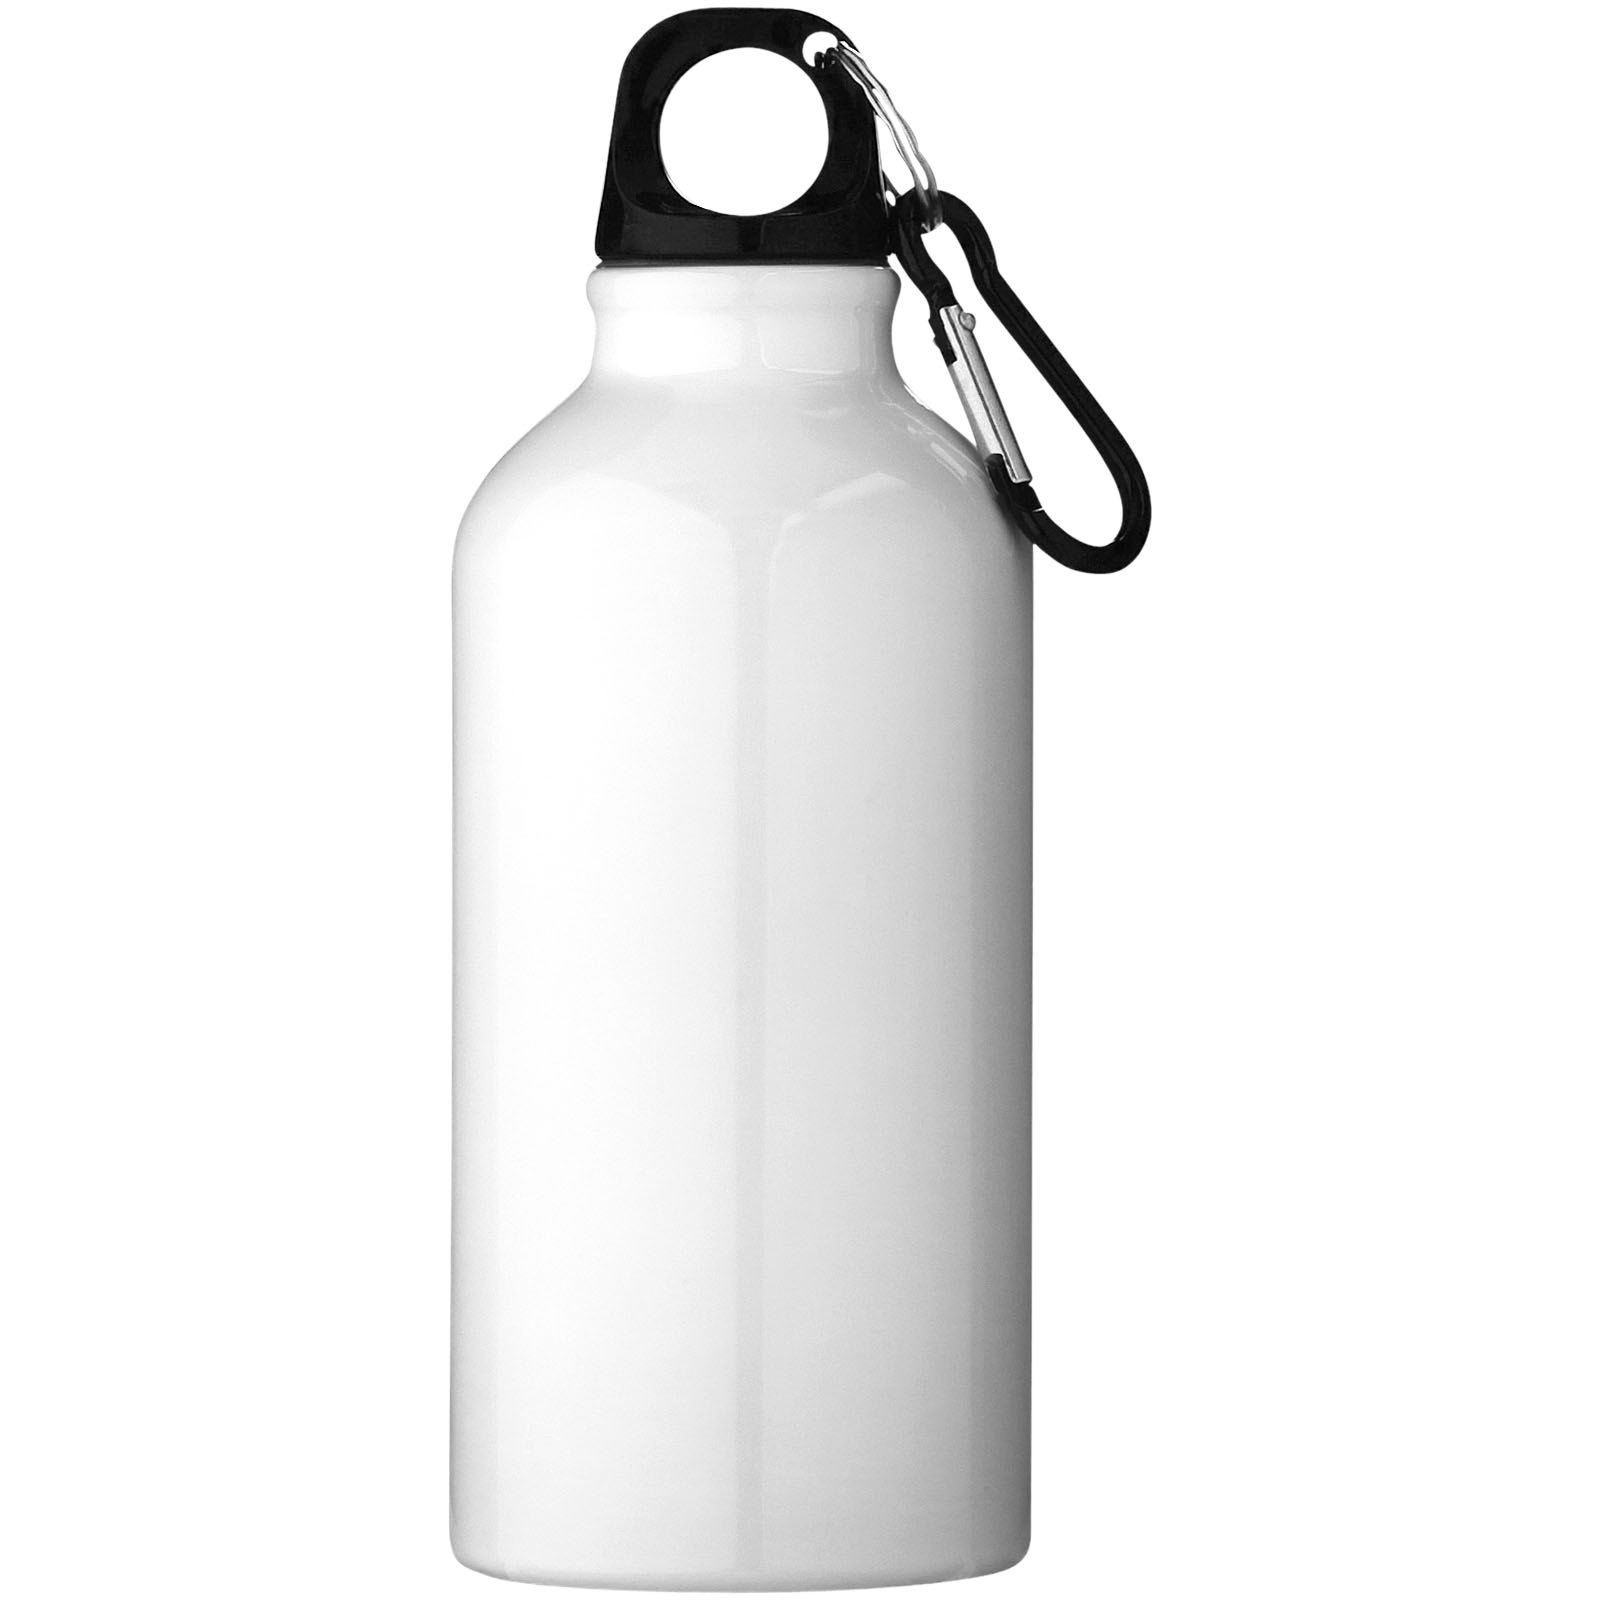 Advertising Water bottles - Oregon 400 ml RCS certified recycled aluminium water bottle with carabiner - 1